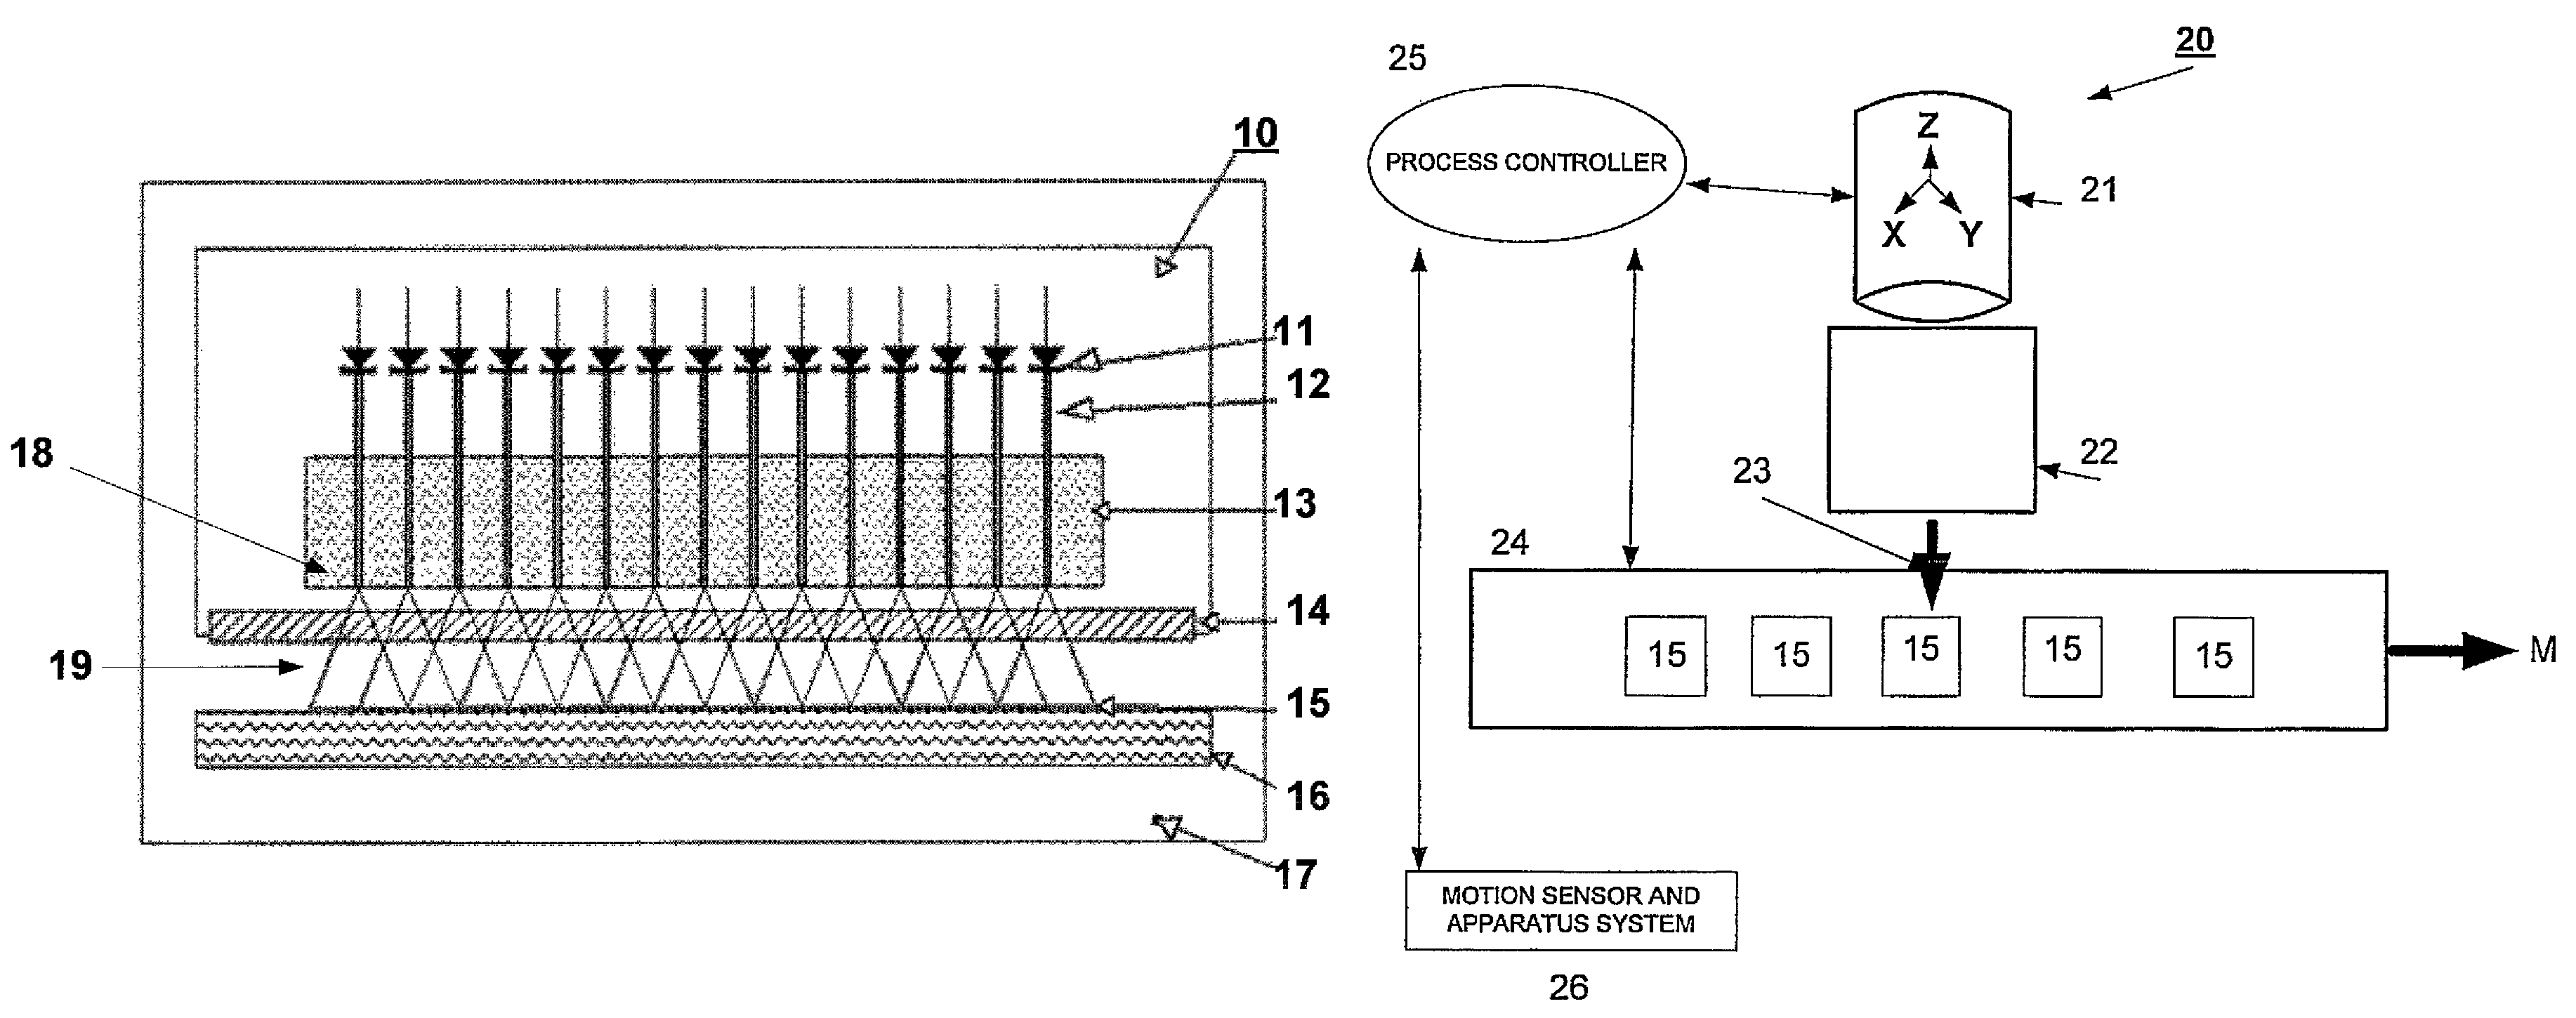 Laser diode array with fiber optic termination for surface treatment of materials